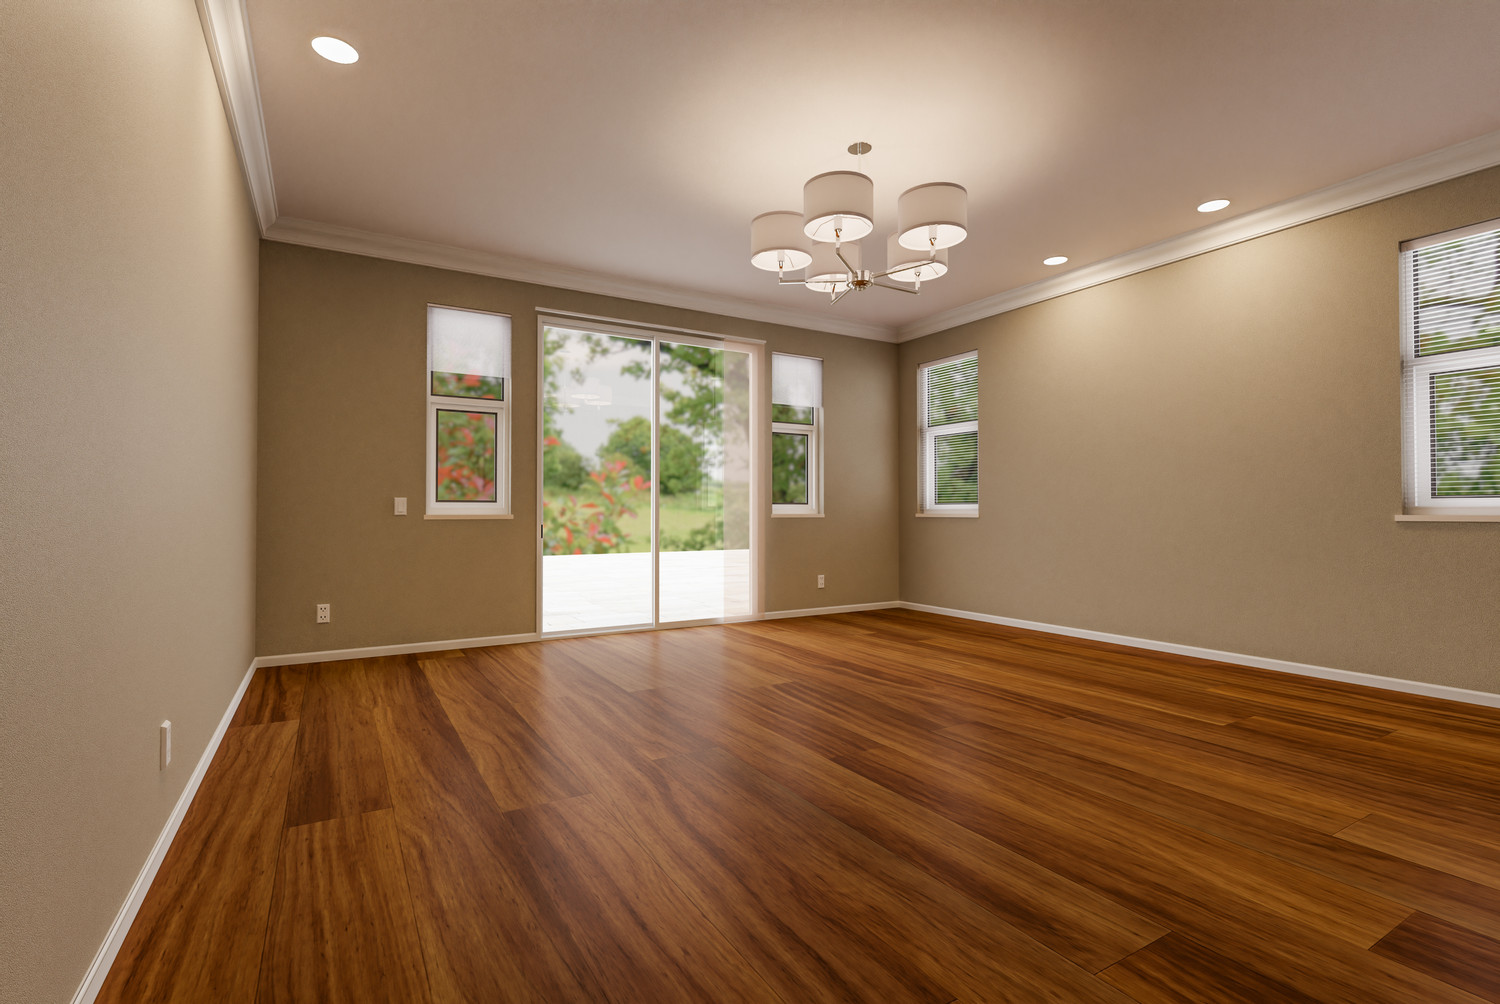 Newly,Remodeled,Room,Of,House,With,Finished,Wood,Floors,,Moulding,